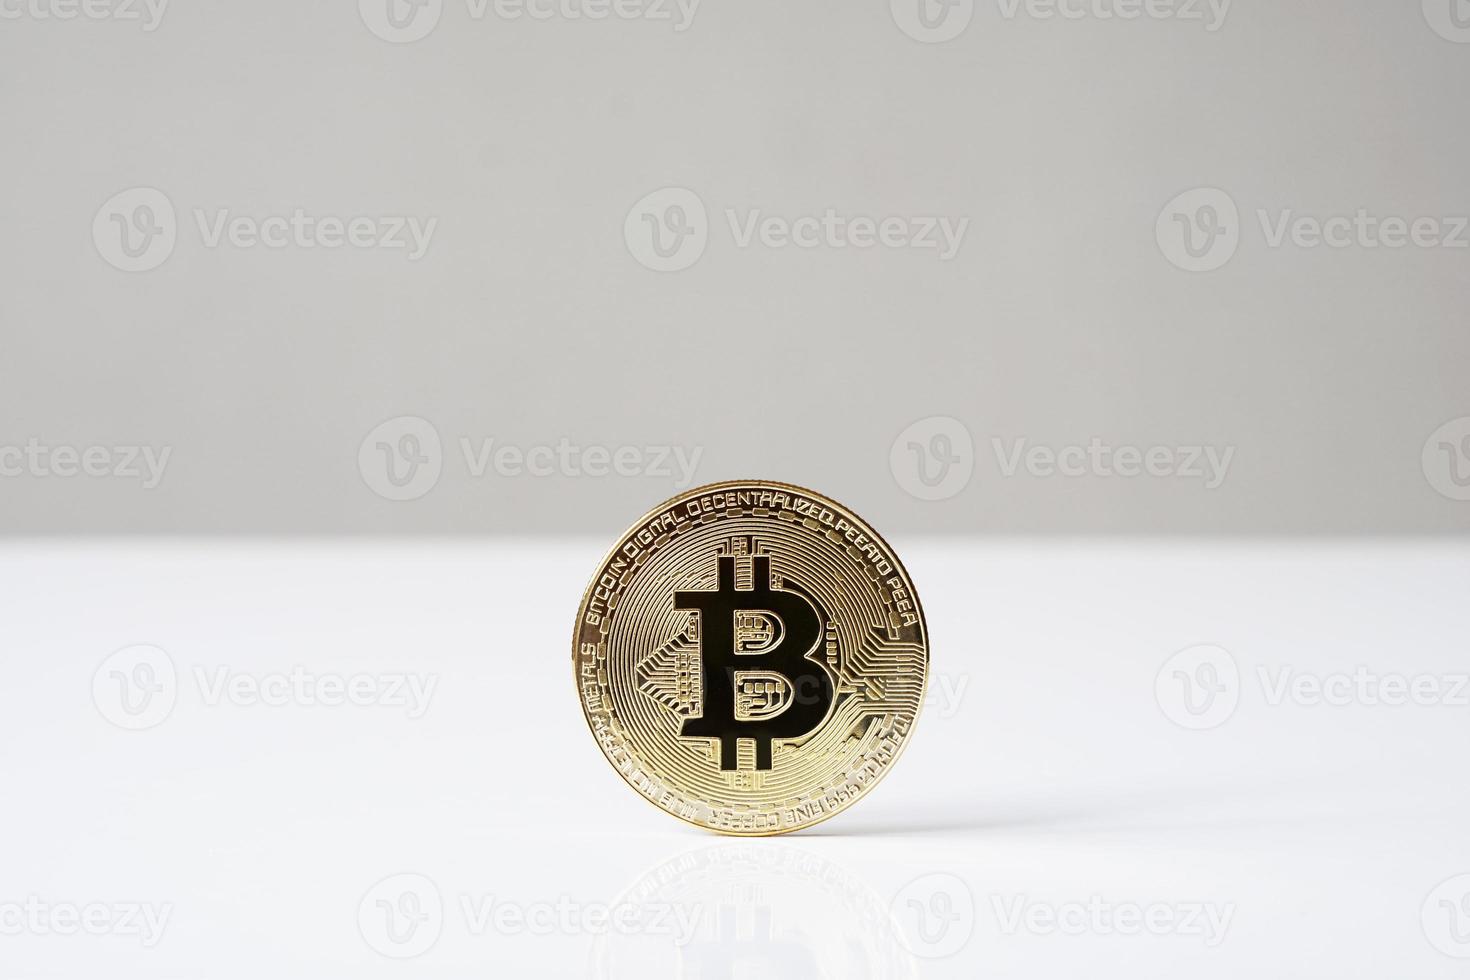 bitcoin cryptocurrency physical coin standing upright on desk photo